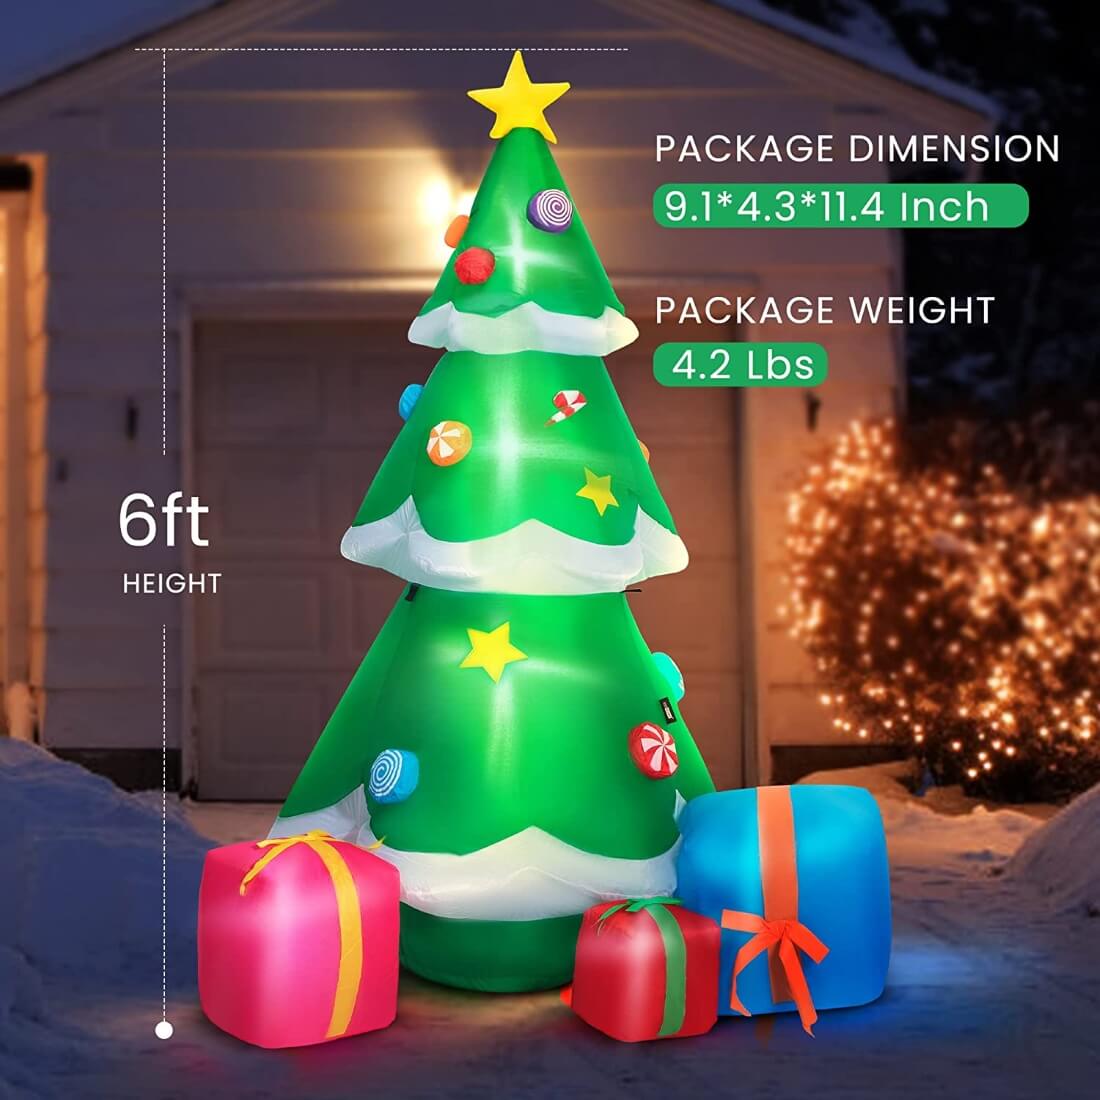  VIVOHOME 6ft Height Inflatable LED Lighted Christmas Tree with 3 Gift Boxes Candy Cane Stars and Ornaments